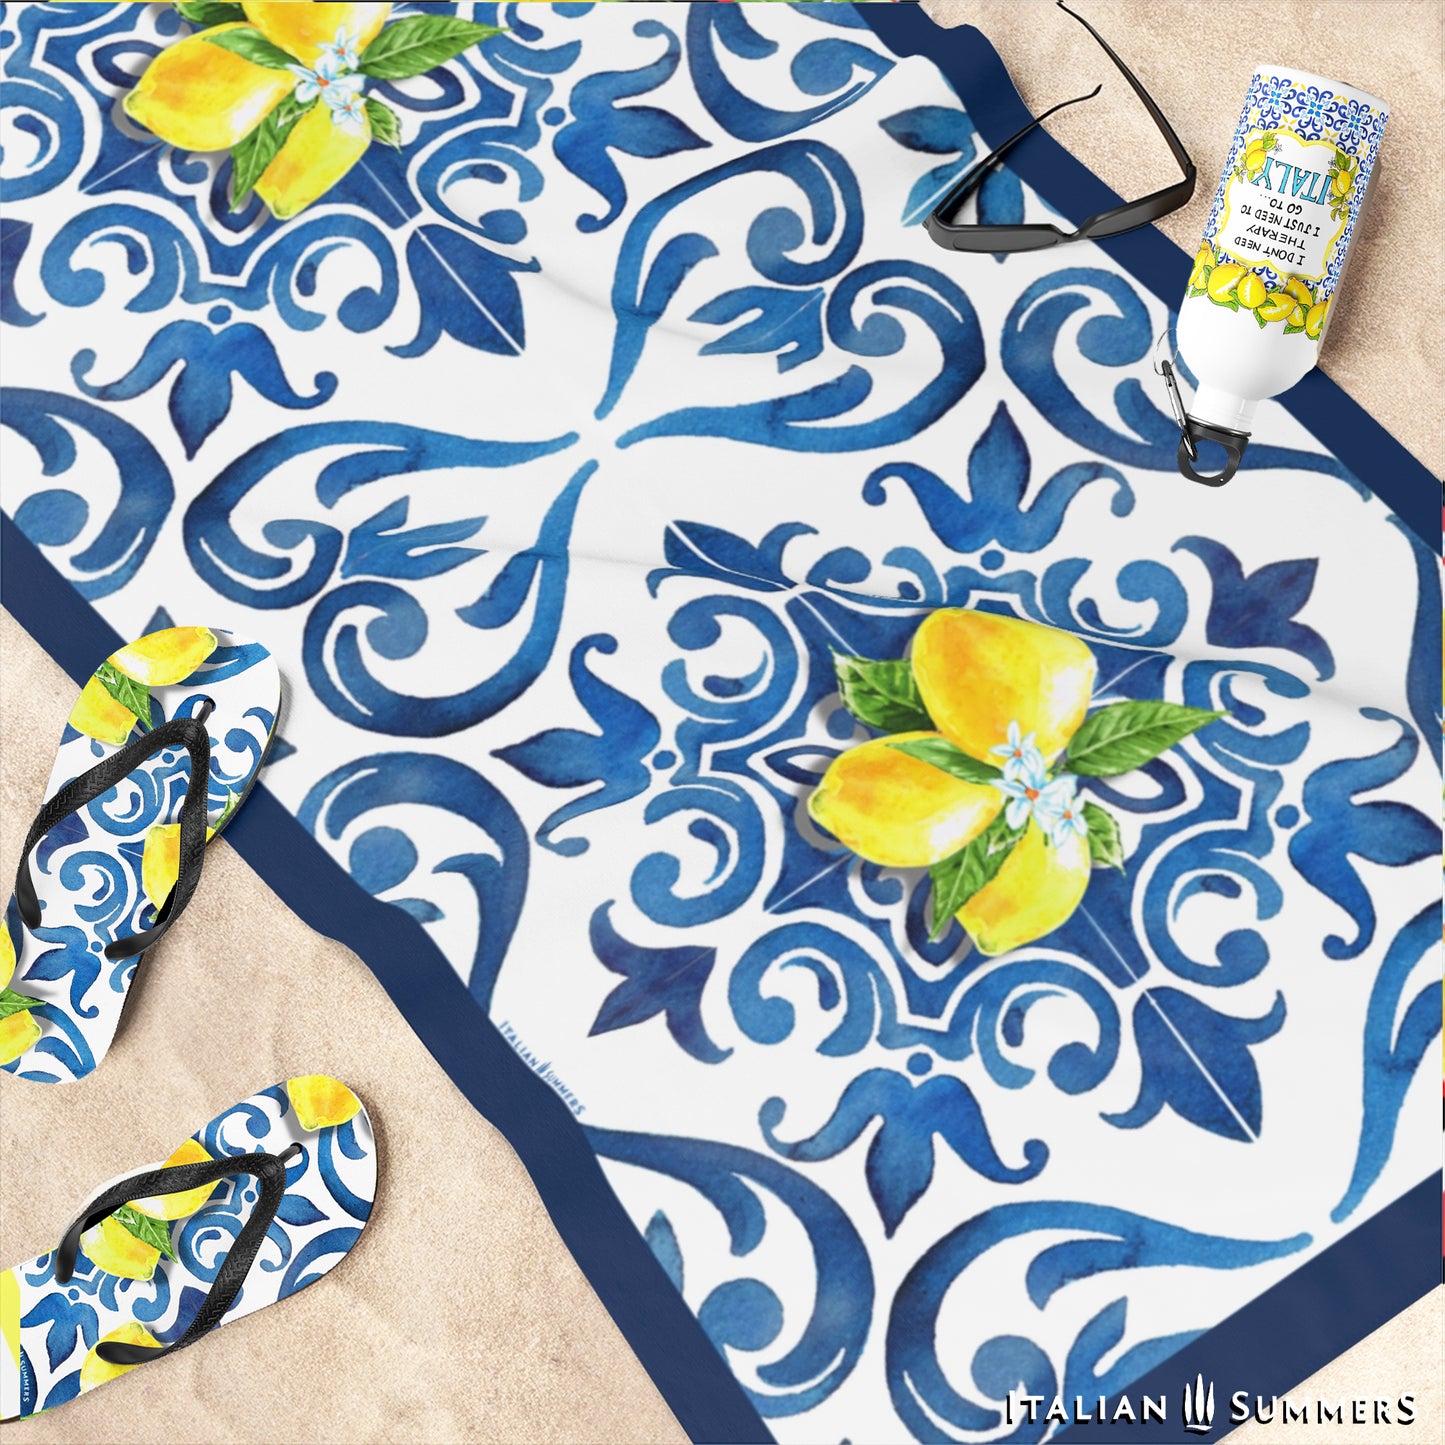 Italy inspired beach towel with a beautiful blue watercolor design of Italian maiolica tiles with bunches  of Sorrento lemons with flowers. made by Italian Summers